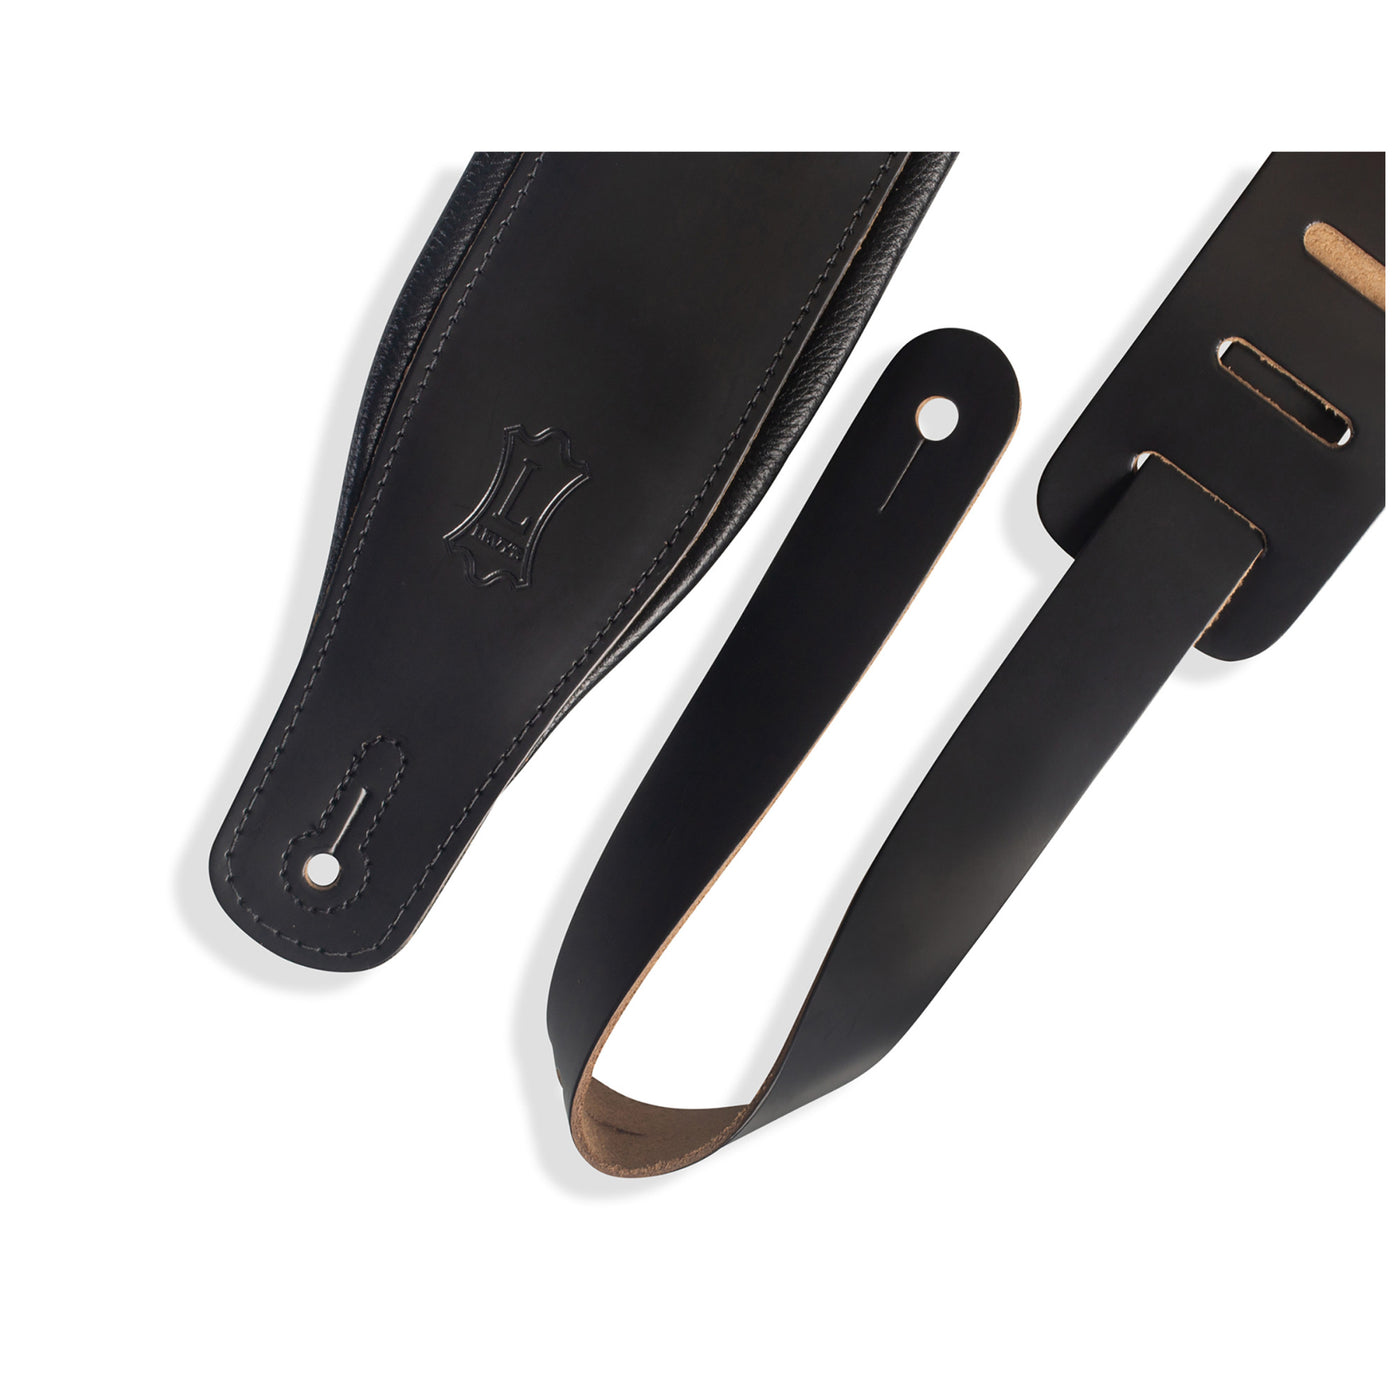 Levy's 3" Padded Leather Strap in Black with Black Backing